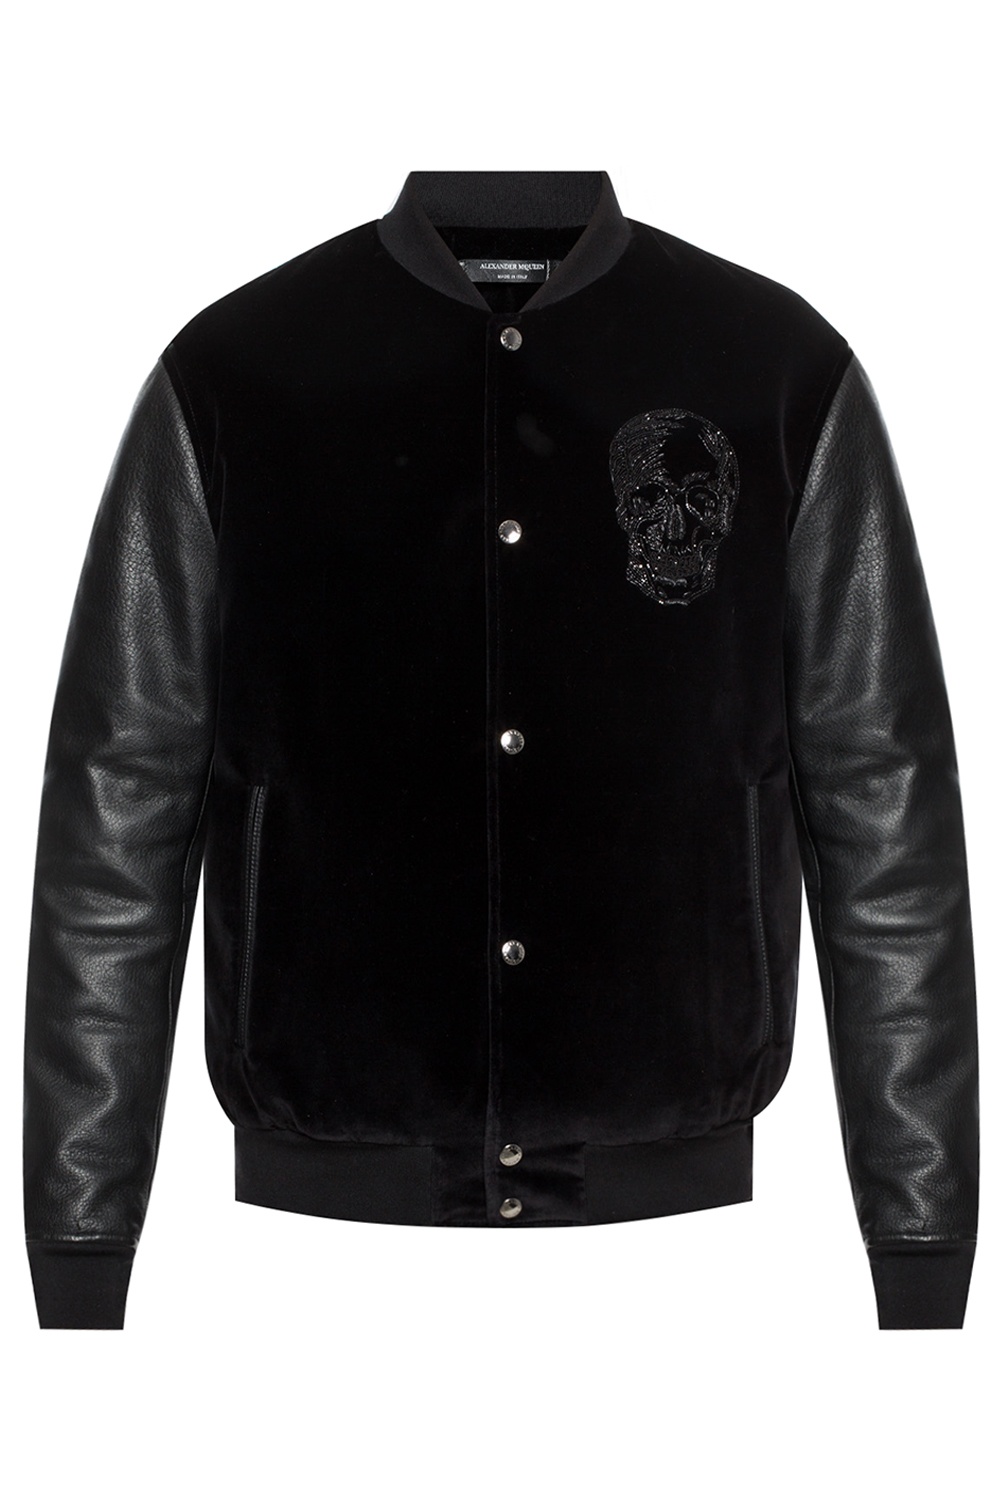 LV Skull Bomber Jacket LV Luxury Clothing Clothes Outfit